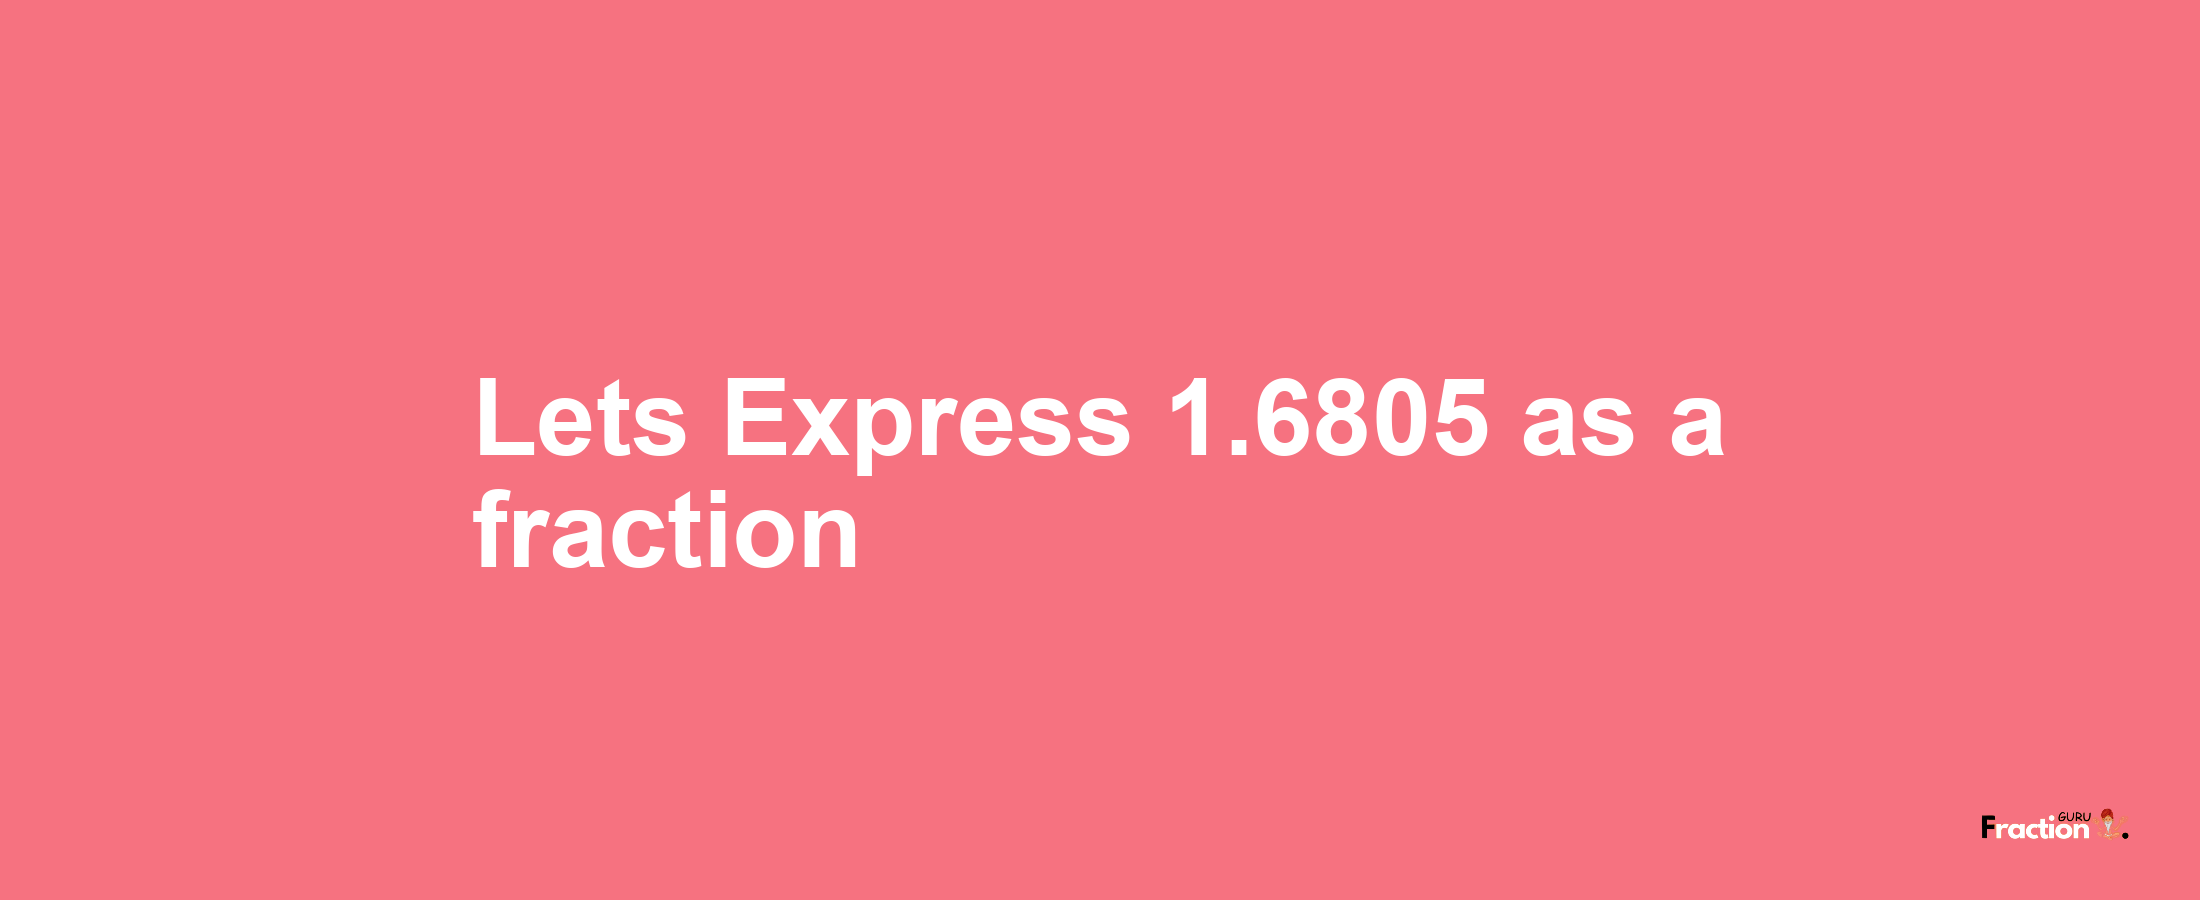 Lets Express 1.6805 as afraction